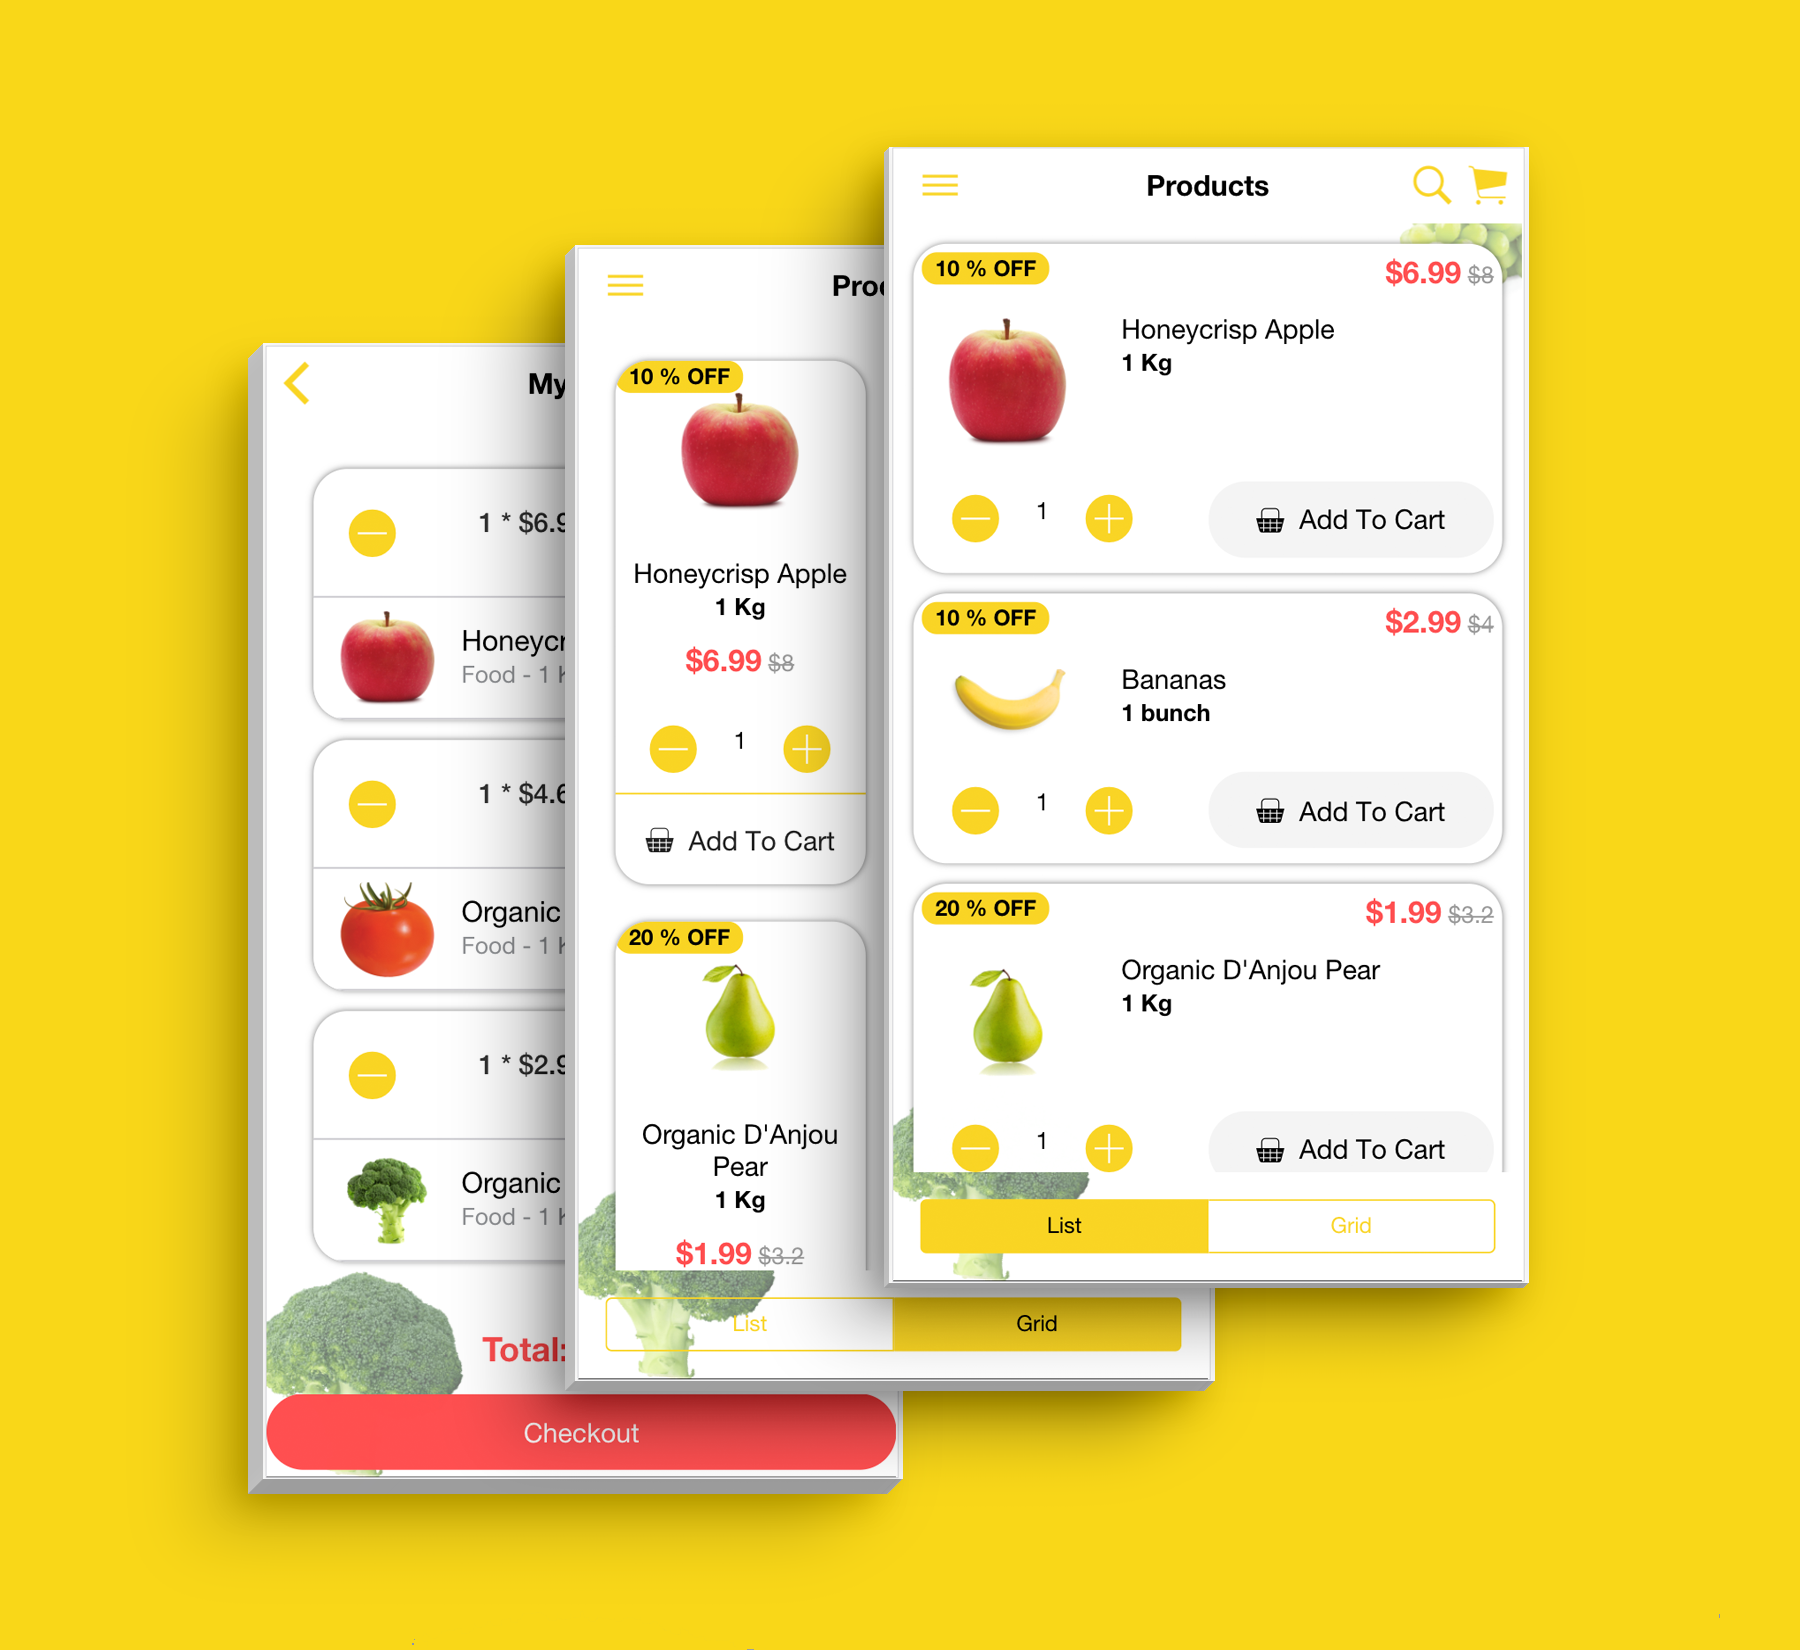 Complete Multipurpose eCommerce Template UI Grocery App Supports Multiple Language i18n - 9